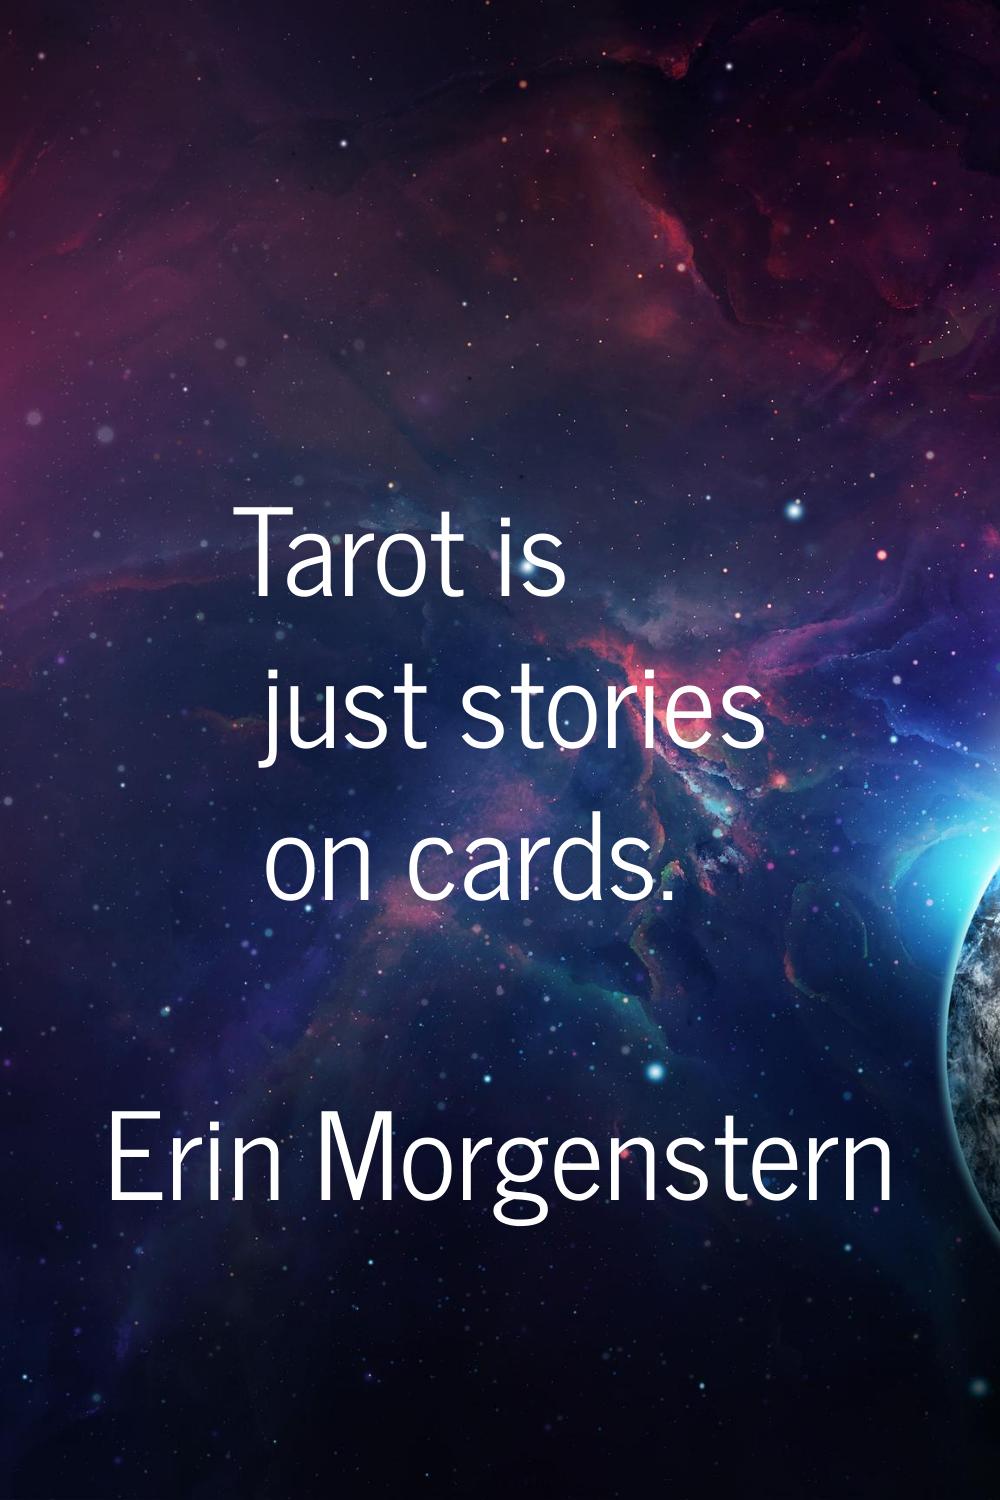 Tarot is just stories on cards.